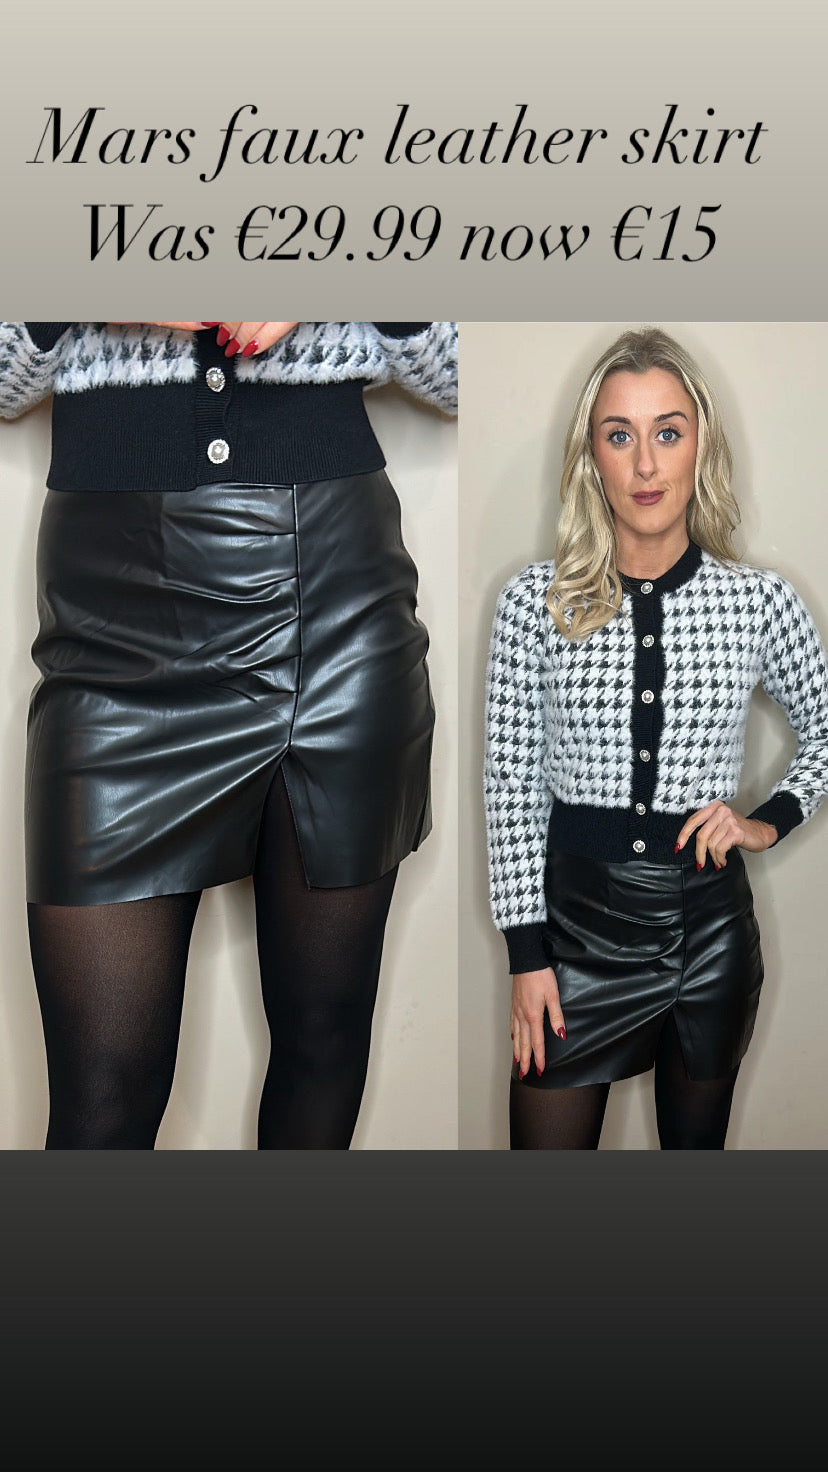 Mars faux leather skirt